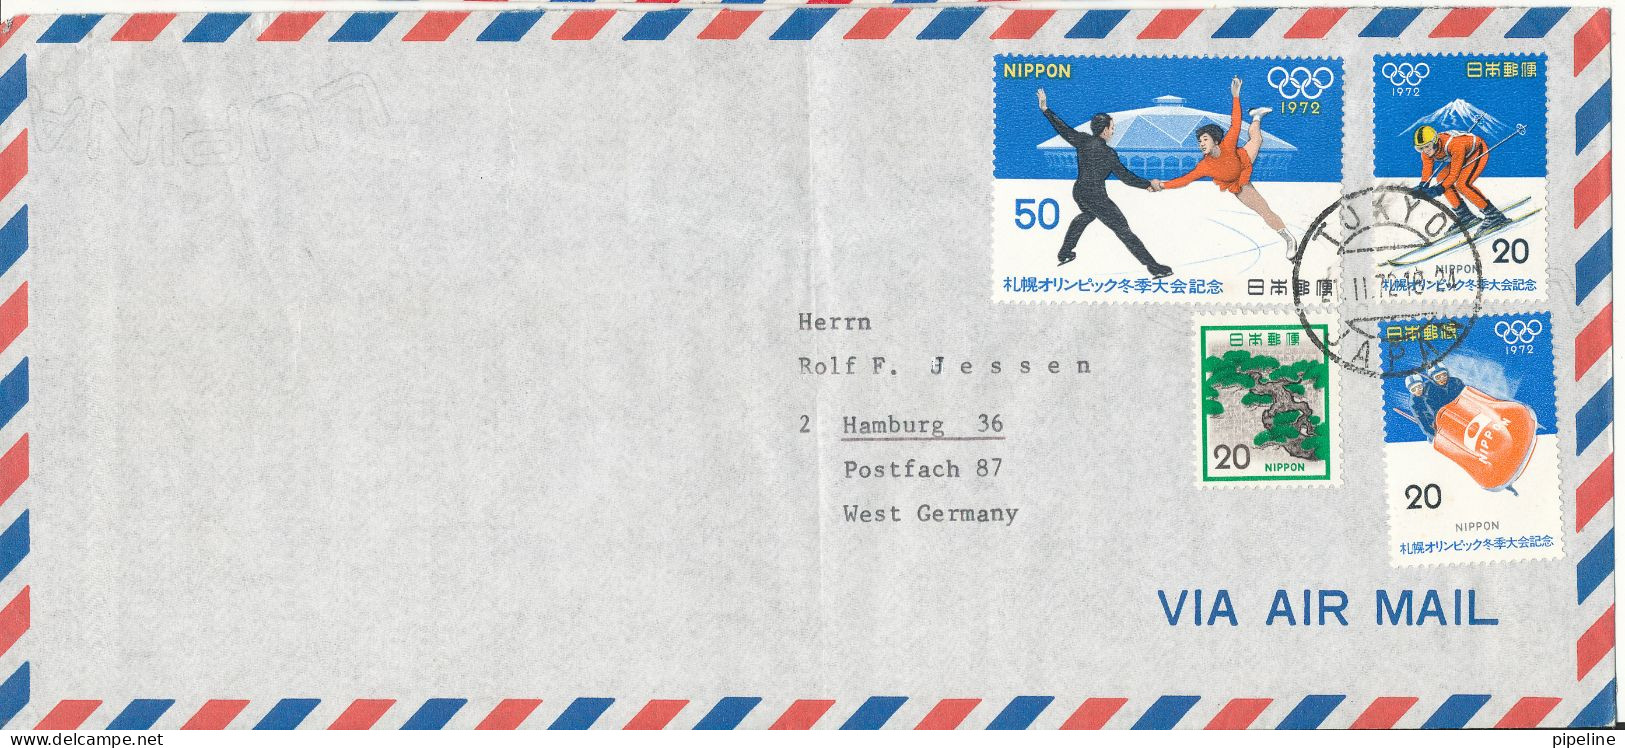 Japan Air Mail Cover Sent To Germany 2-11-1972 With More Topic Stamps Folded Cover - Luchtpost